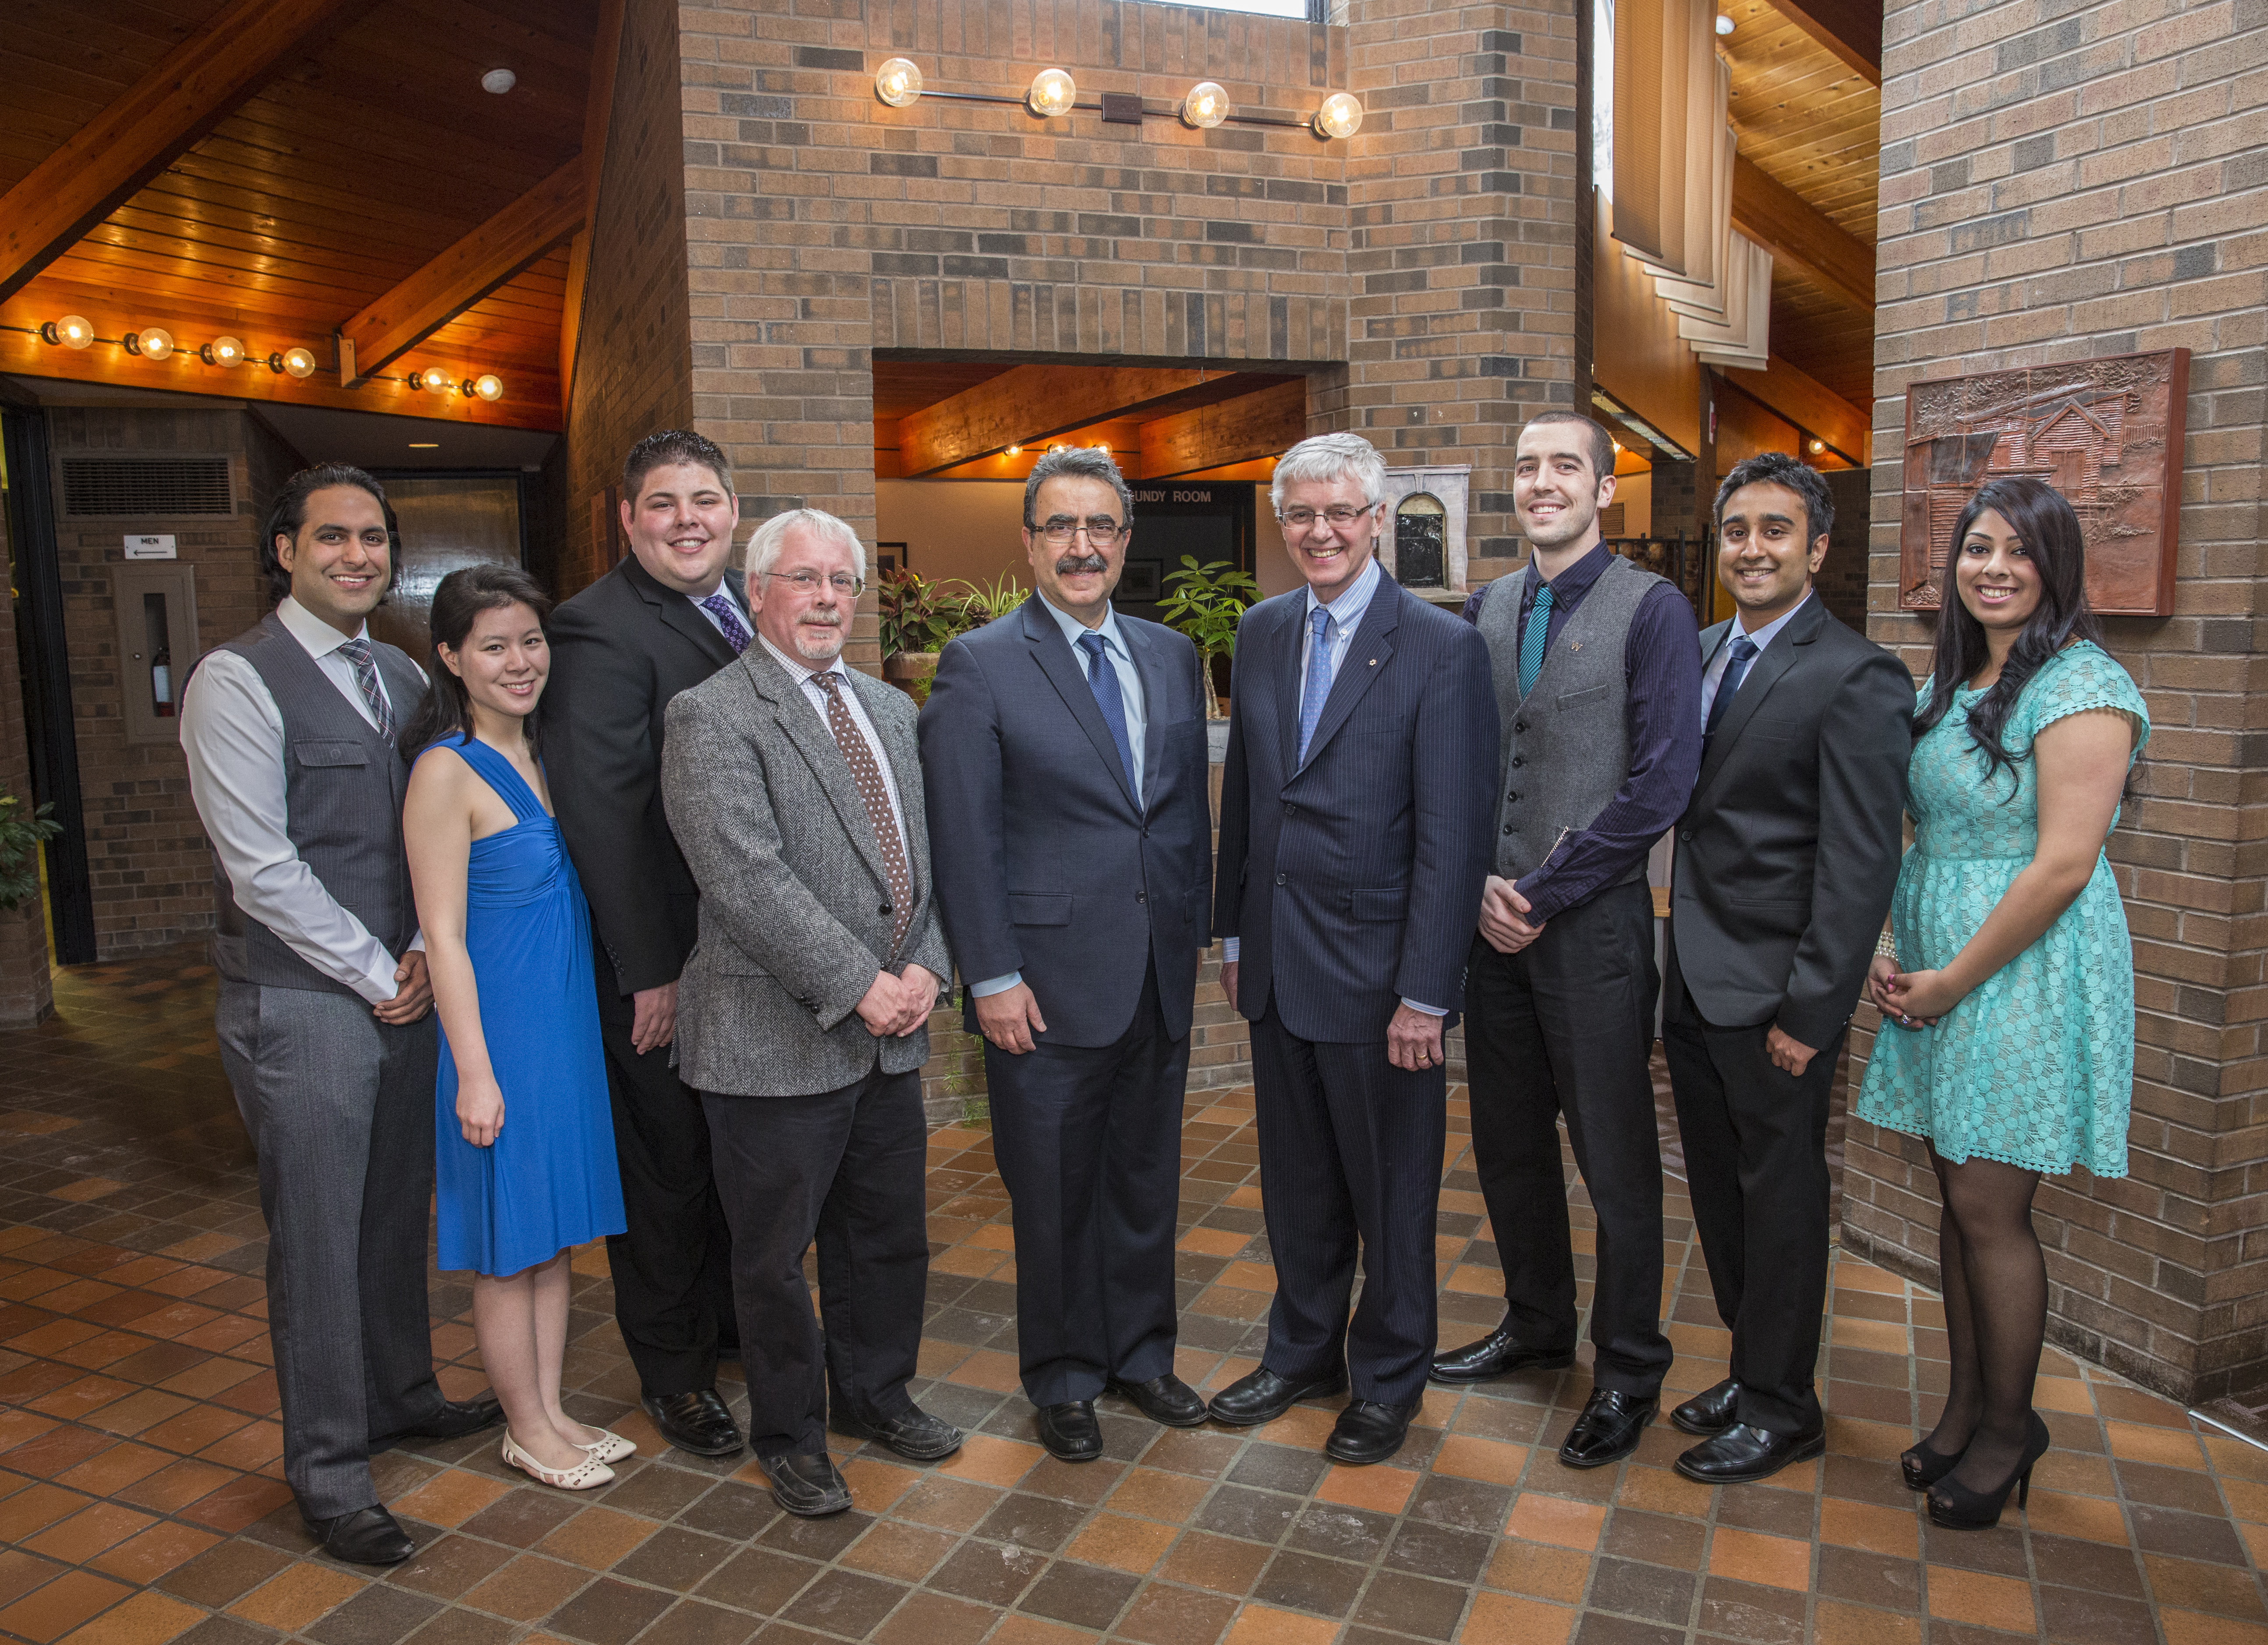 Master of Public Service students pose with Dean of Arts Doug Peers, President Feridun Hamdullahpur, and Kevin Lynch.